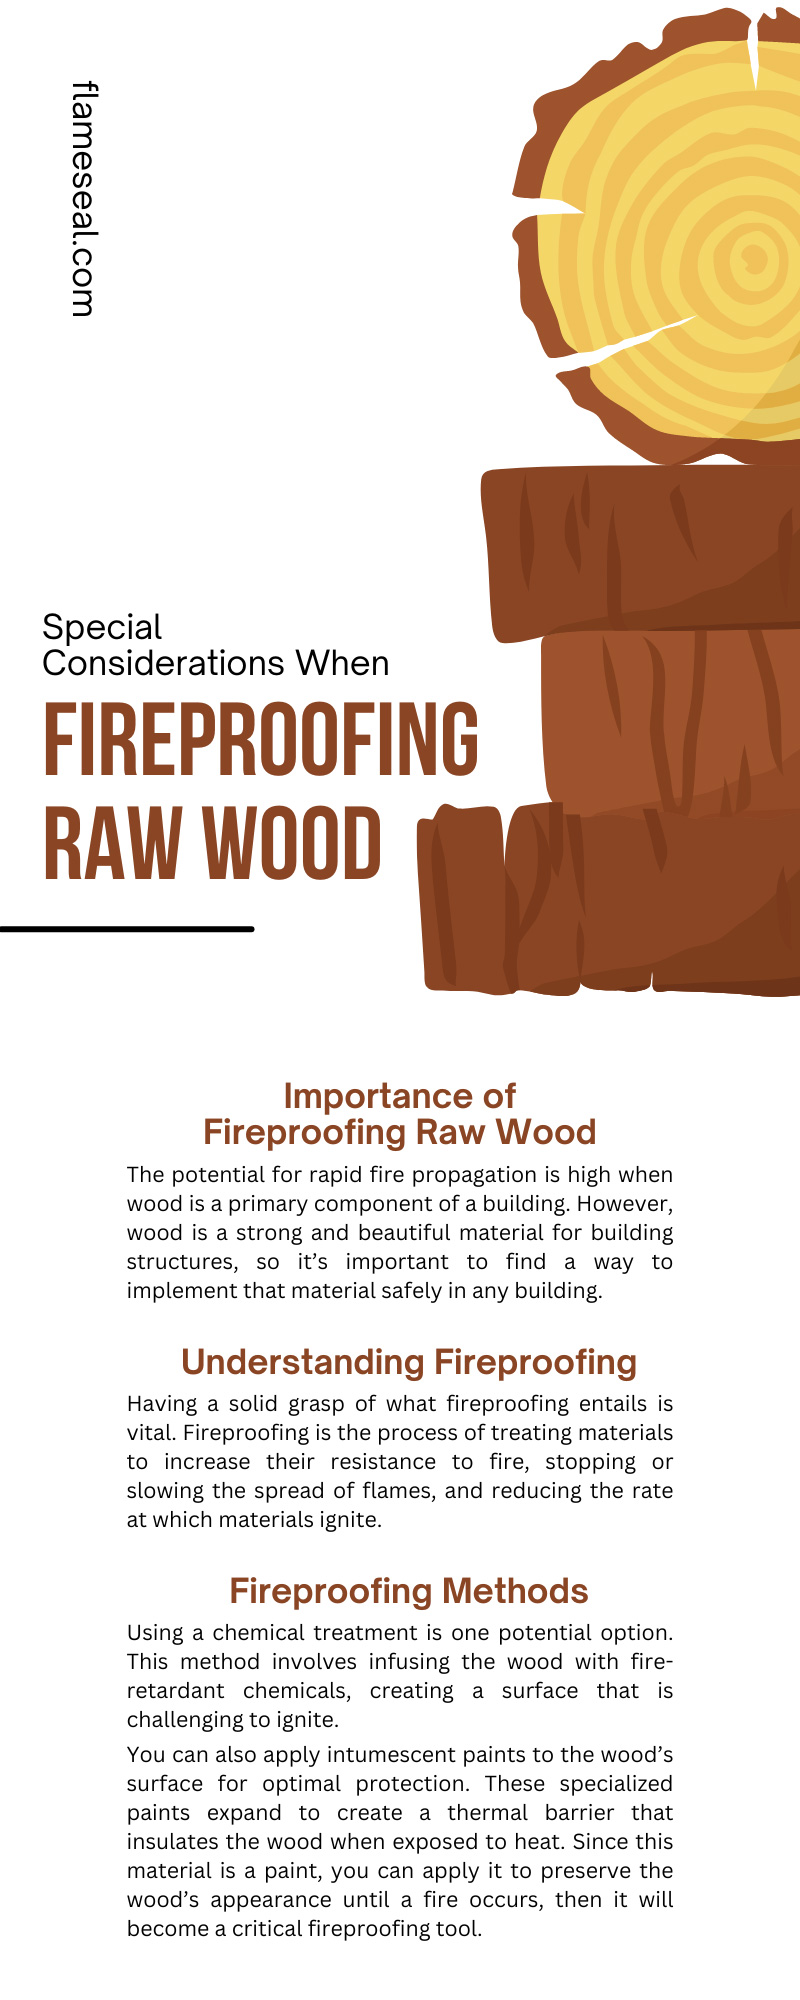 Special Considerations When Fireproofing Raw Wood